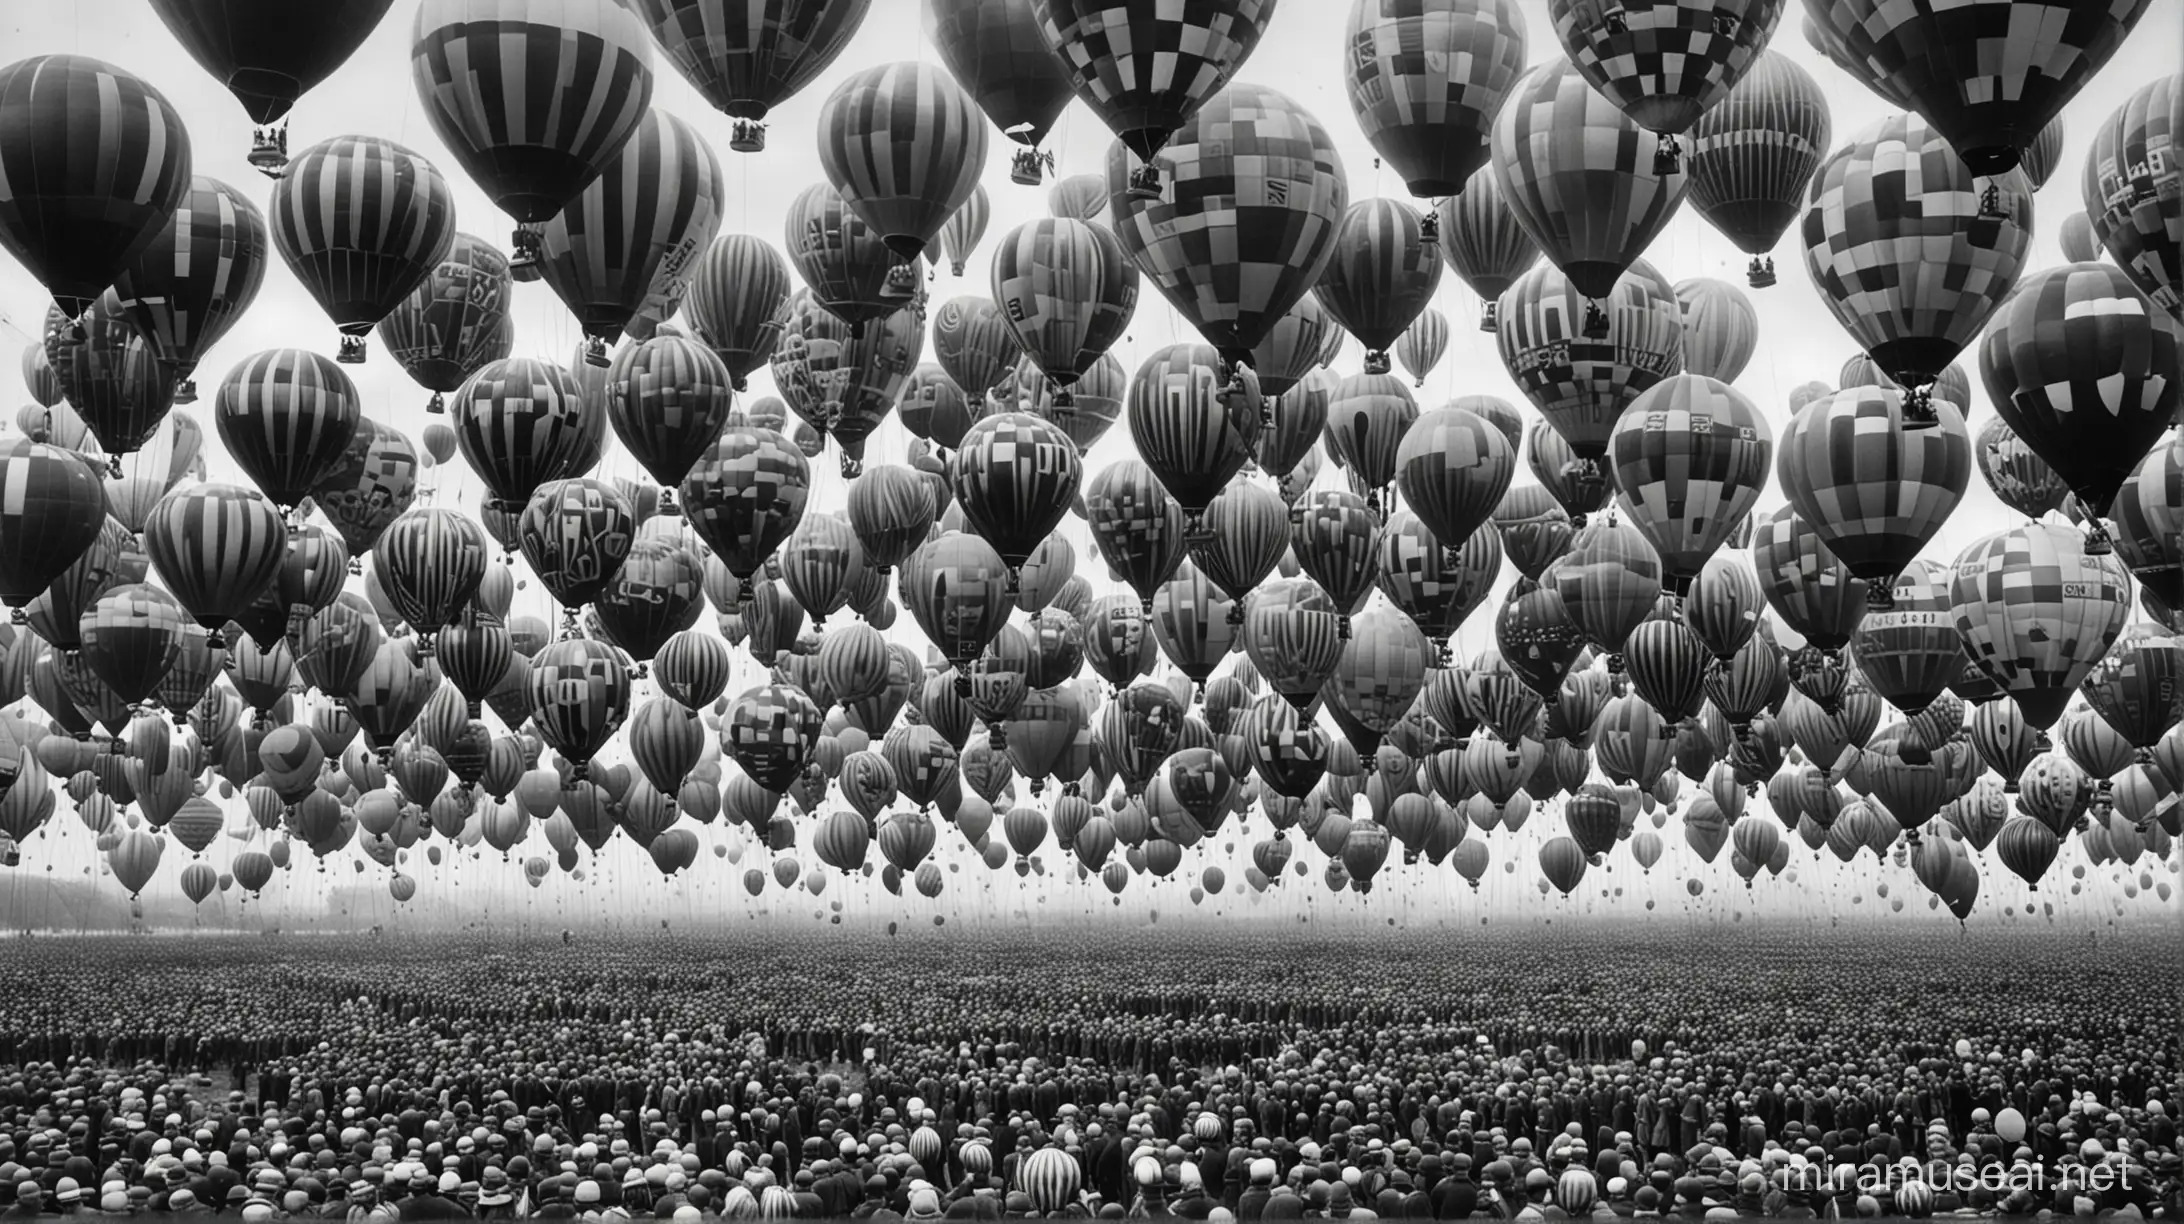 Historic 1910 German Scenery Balloon Army Ascends in Monochrome